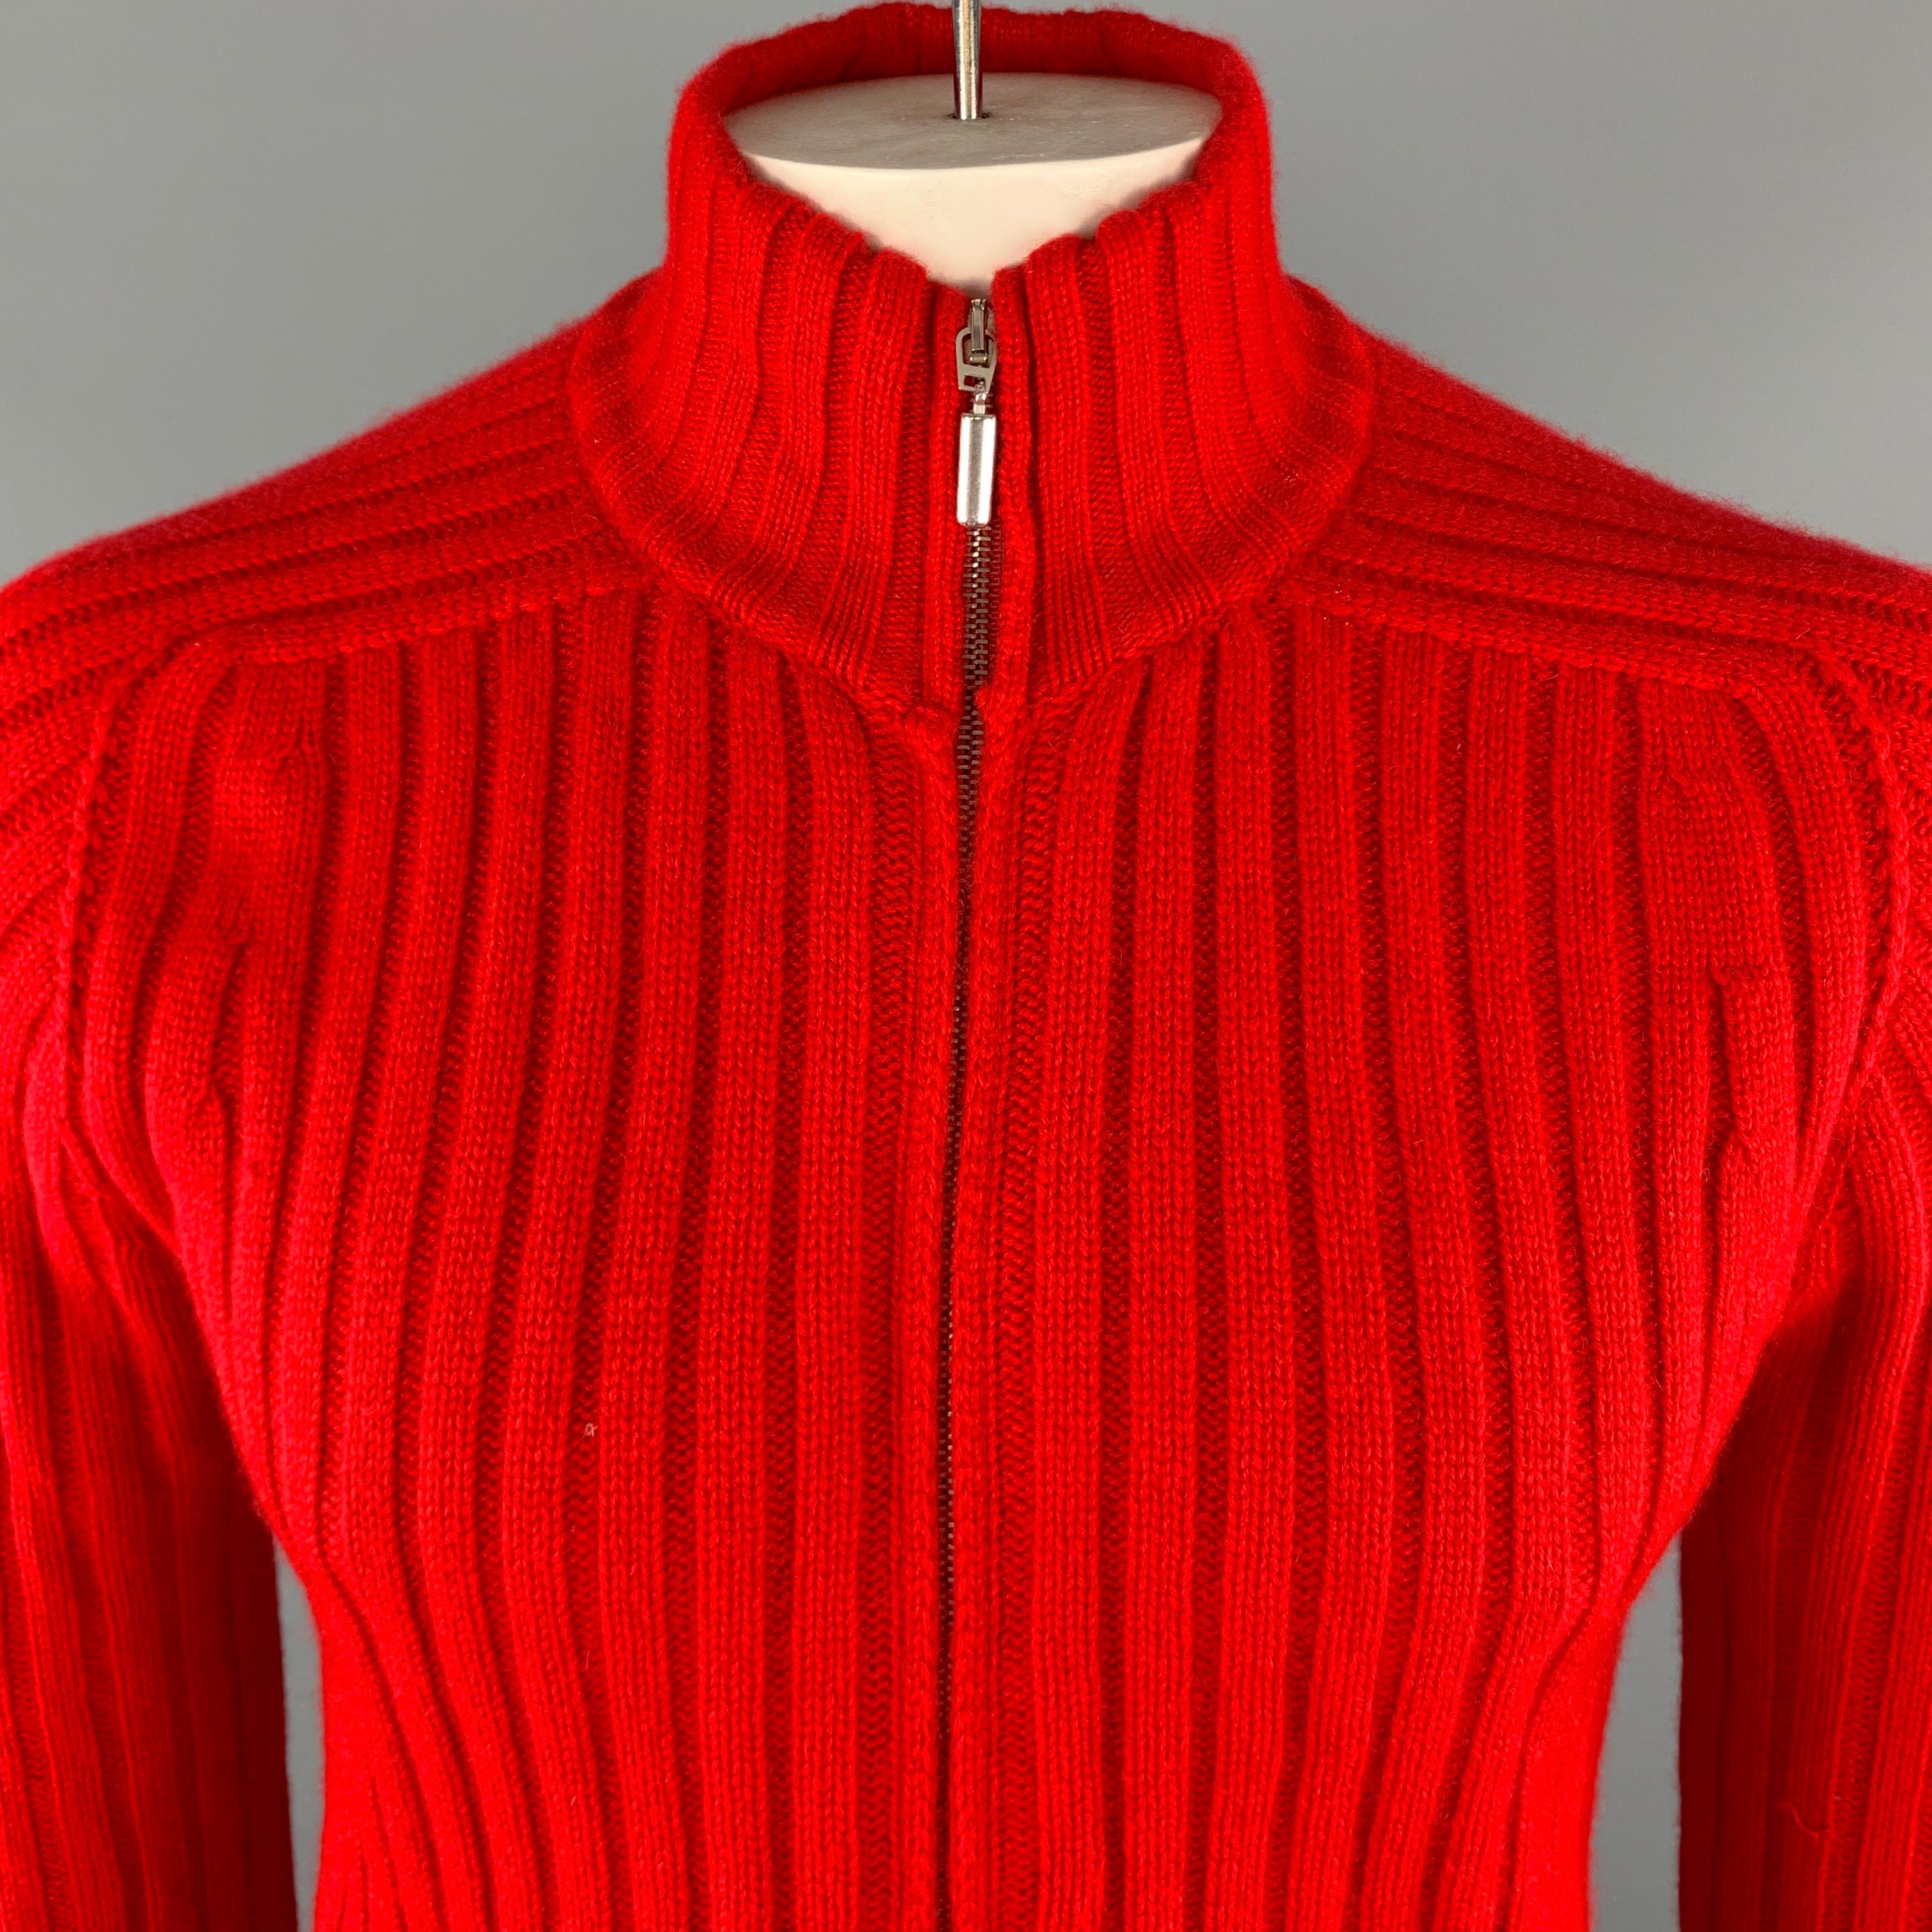 MOSCHINO Pullover Sweater comes in a brilliant red tone in a ribbed cashmere material, with a high collar, slit pockets, zip up. Made in Italy.

Excellent Pre-Owned Condition.
Marked: IT 54

Measurements:

Shoulder: 18 in. 
Chest: 43 in. 
Sleeve: 27